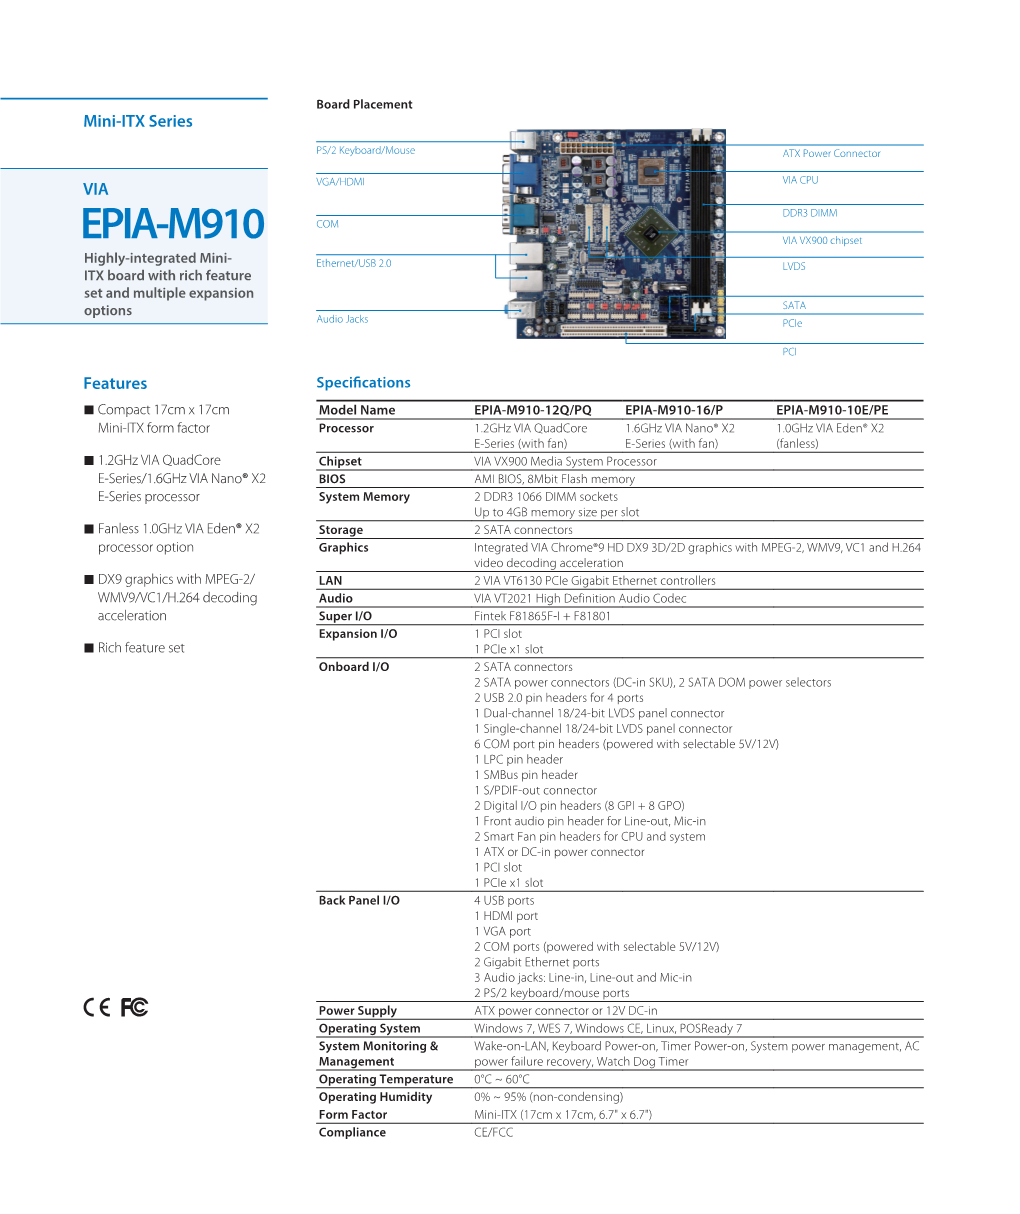 EPIA-M910 VIA VX900 Chipset Highly-Integrated Mini- Ethernet/USB 2.0 LVDS ITX Board with Rich Feature Set and Multiple Expansion Options SATA Audio Jacks Pcie